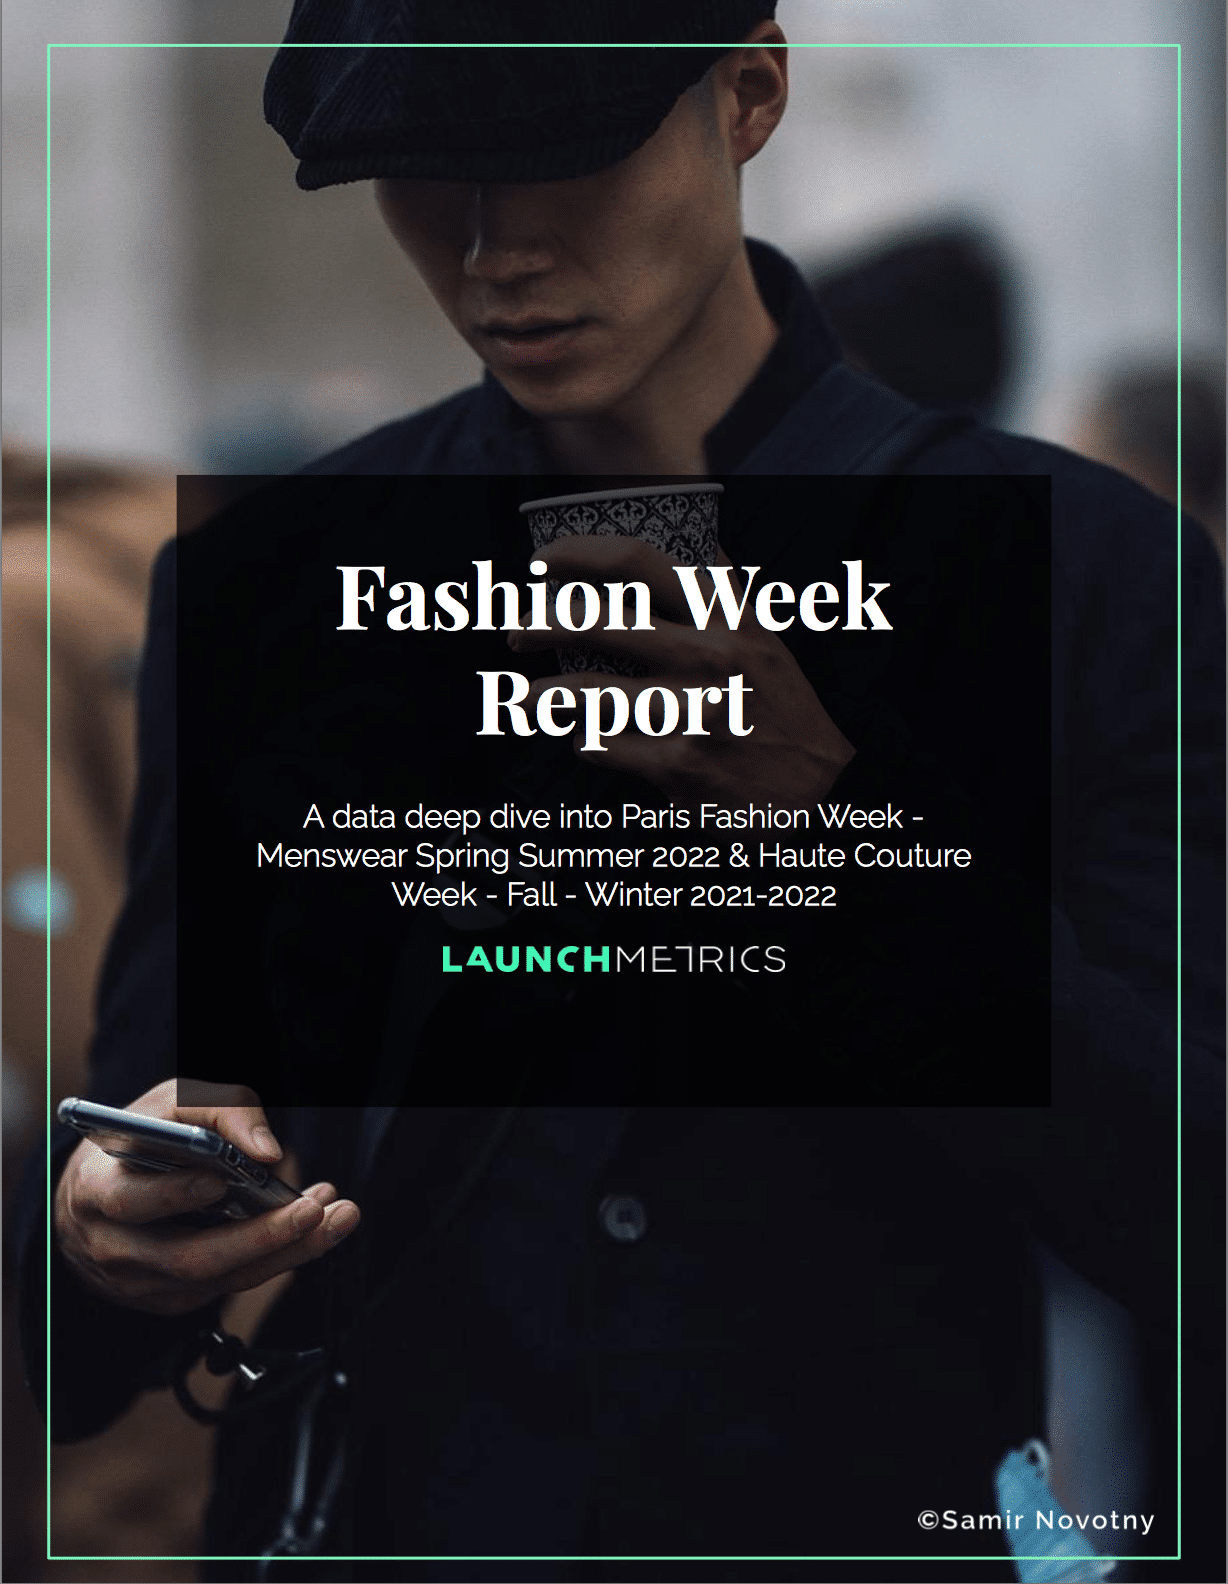 Paris Fashion Week Returns, Making The Case For In-Person Haute